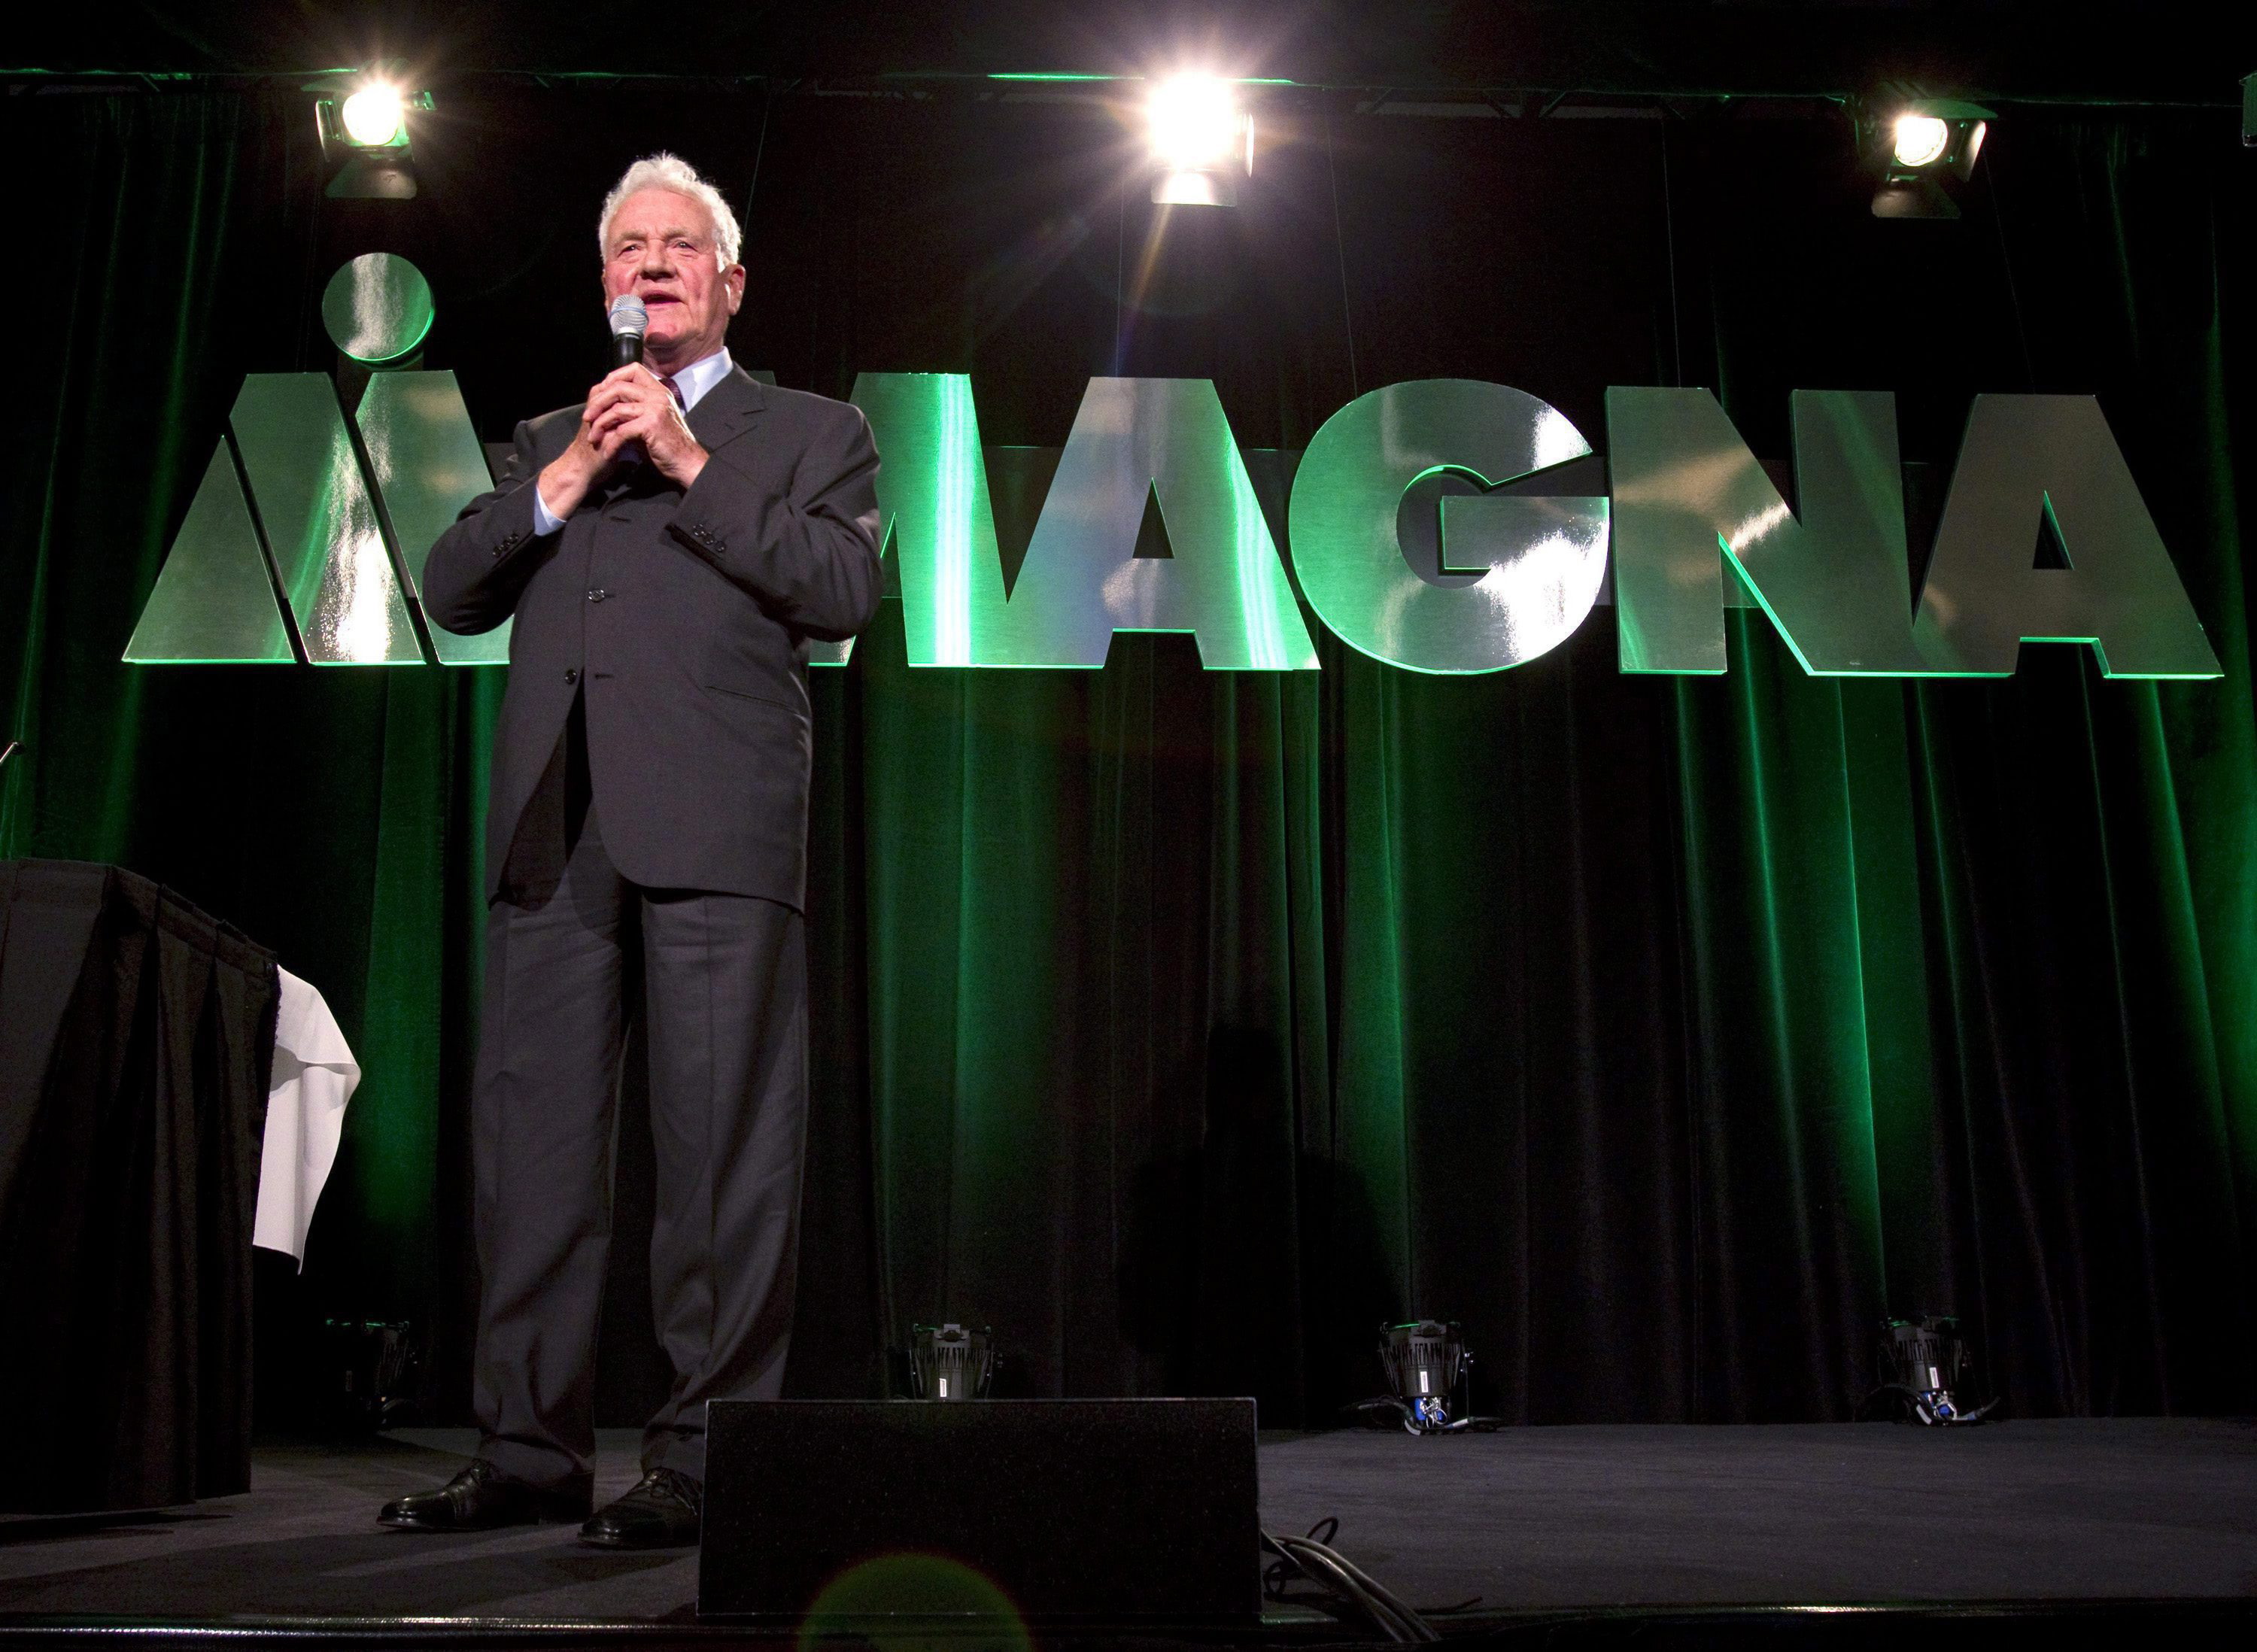 Canadian businessman Frank Stronach charged in Peel police sexual assault investigation